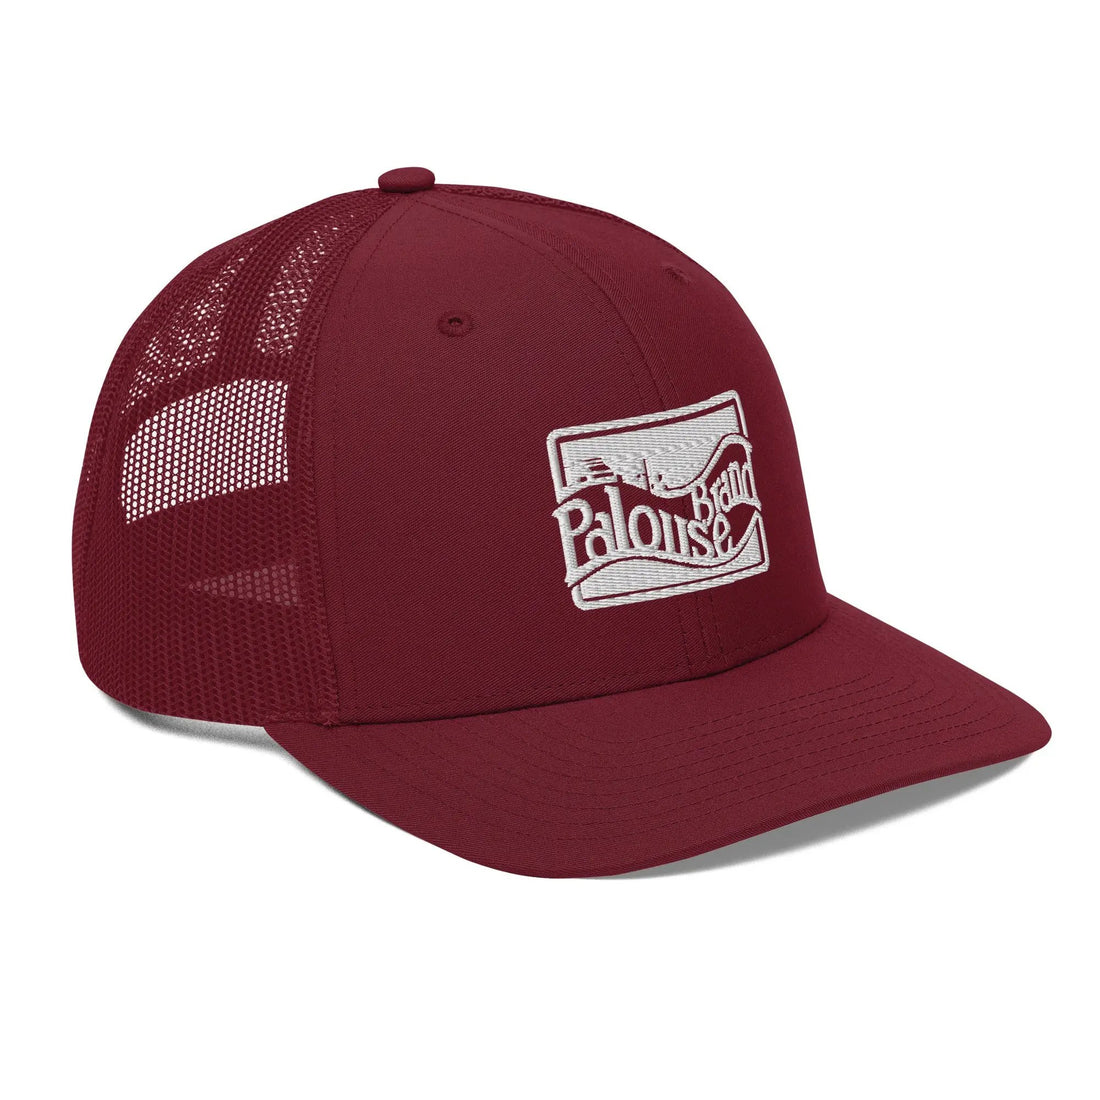 a red trucker hat with a white logo on the front